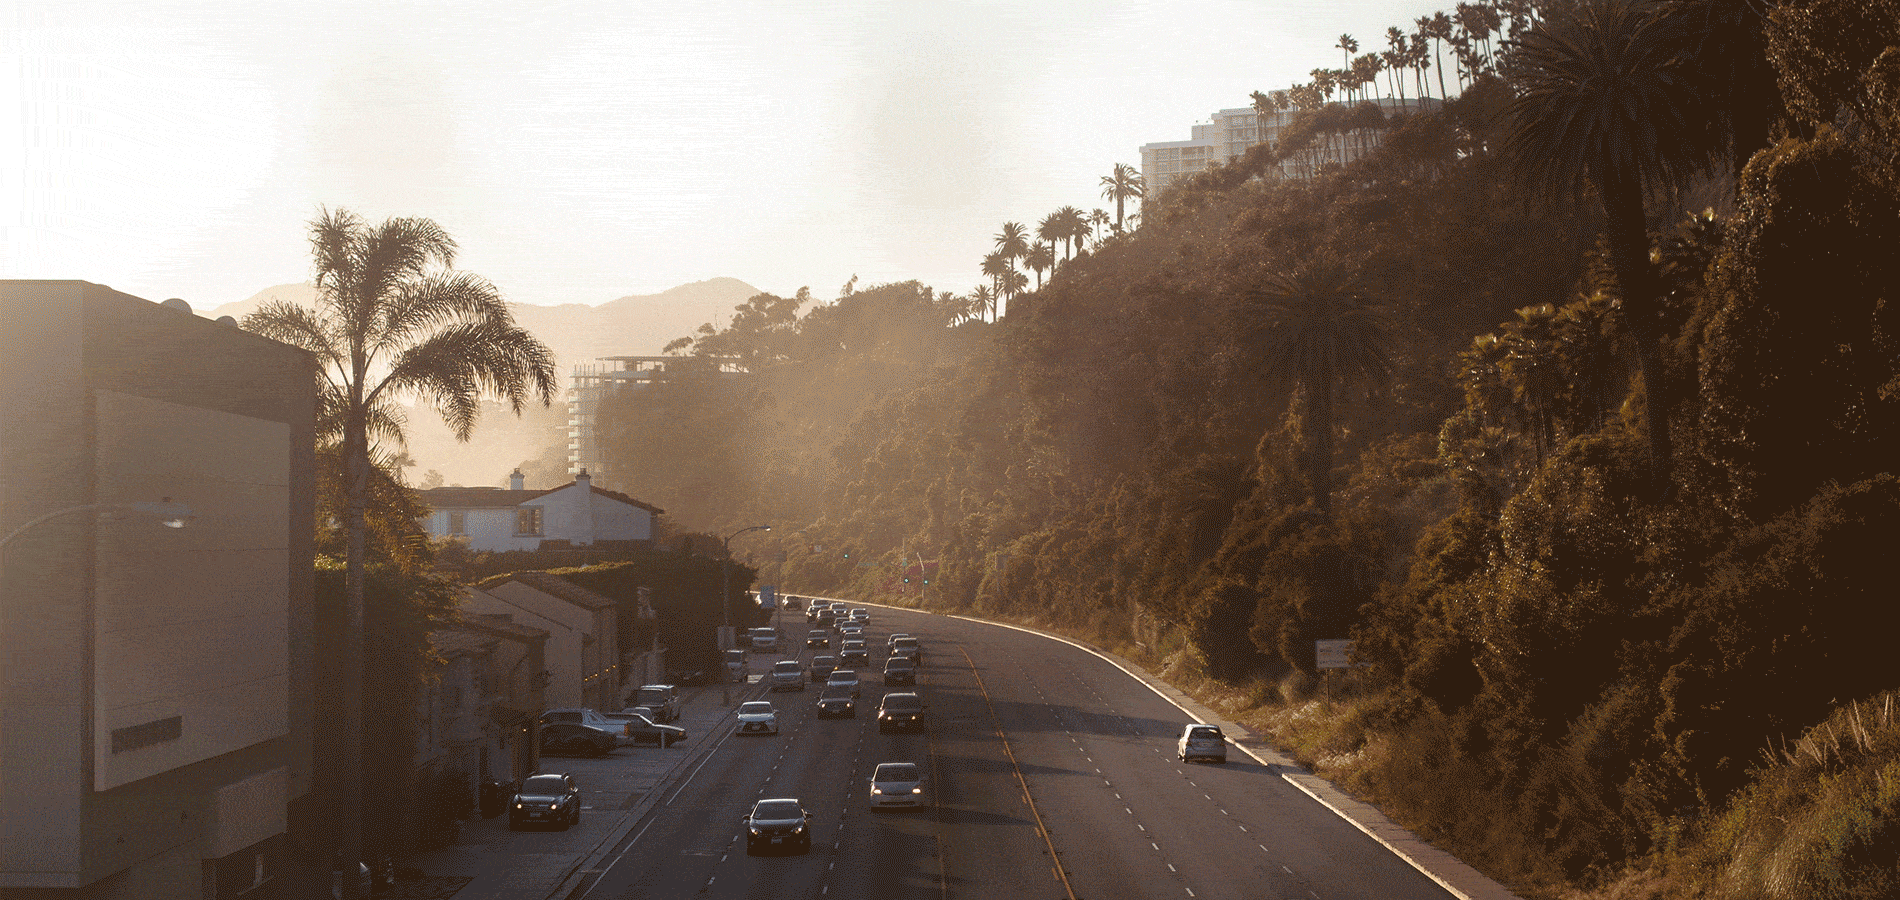 Gif of highway lined with palm trees showing how to edit photos on iPhone